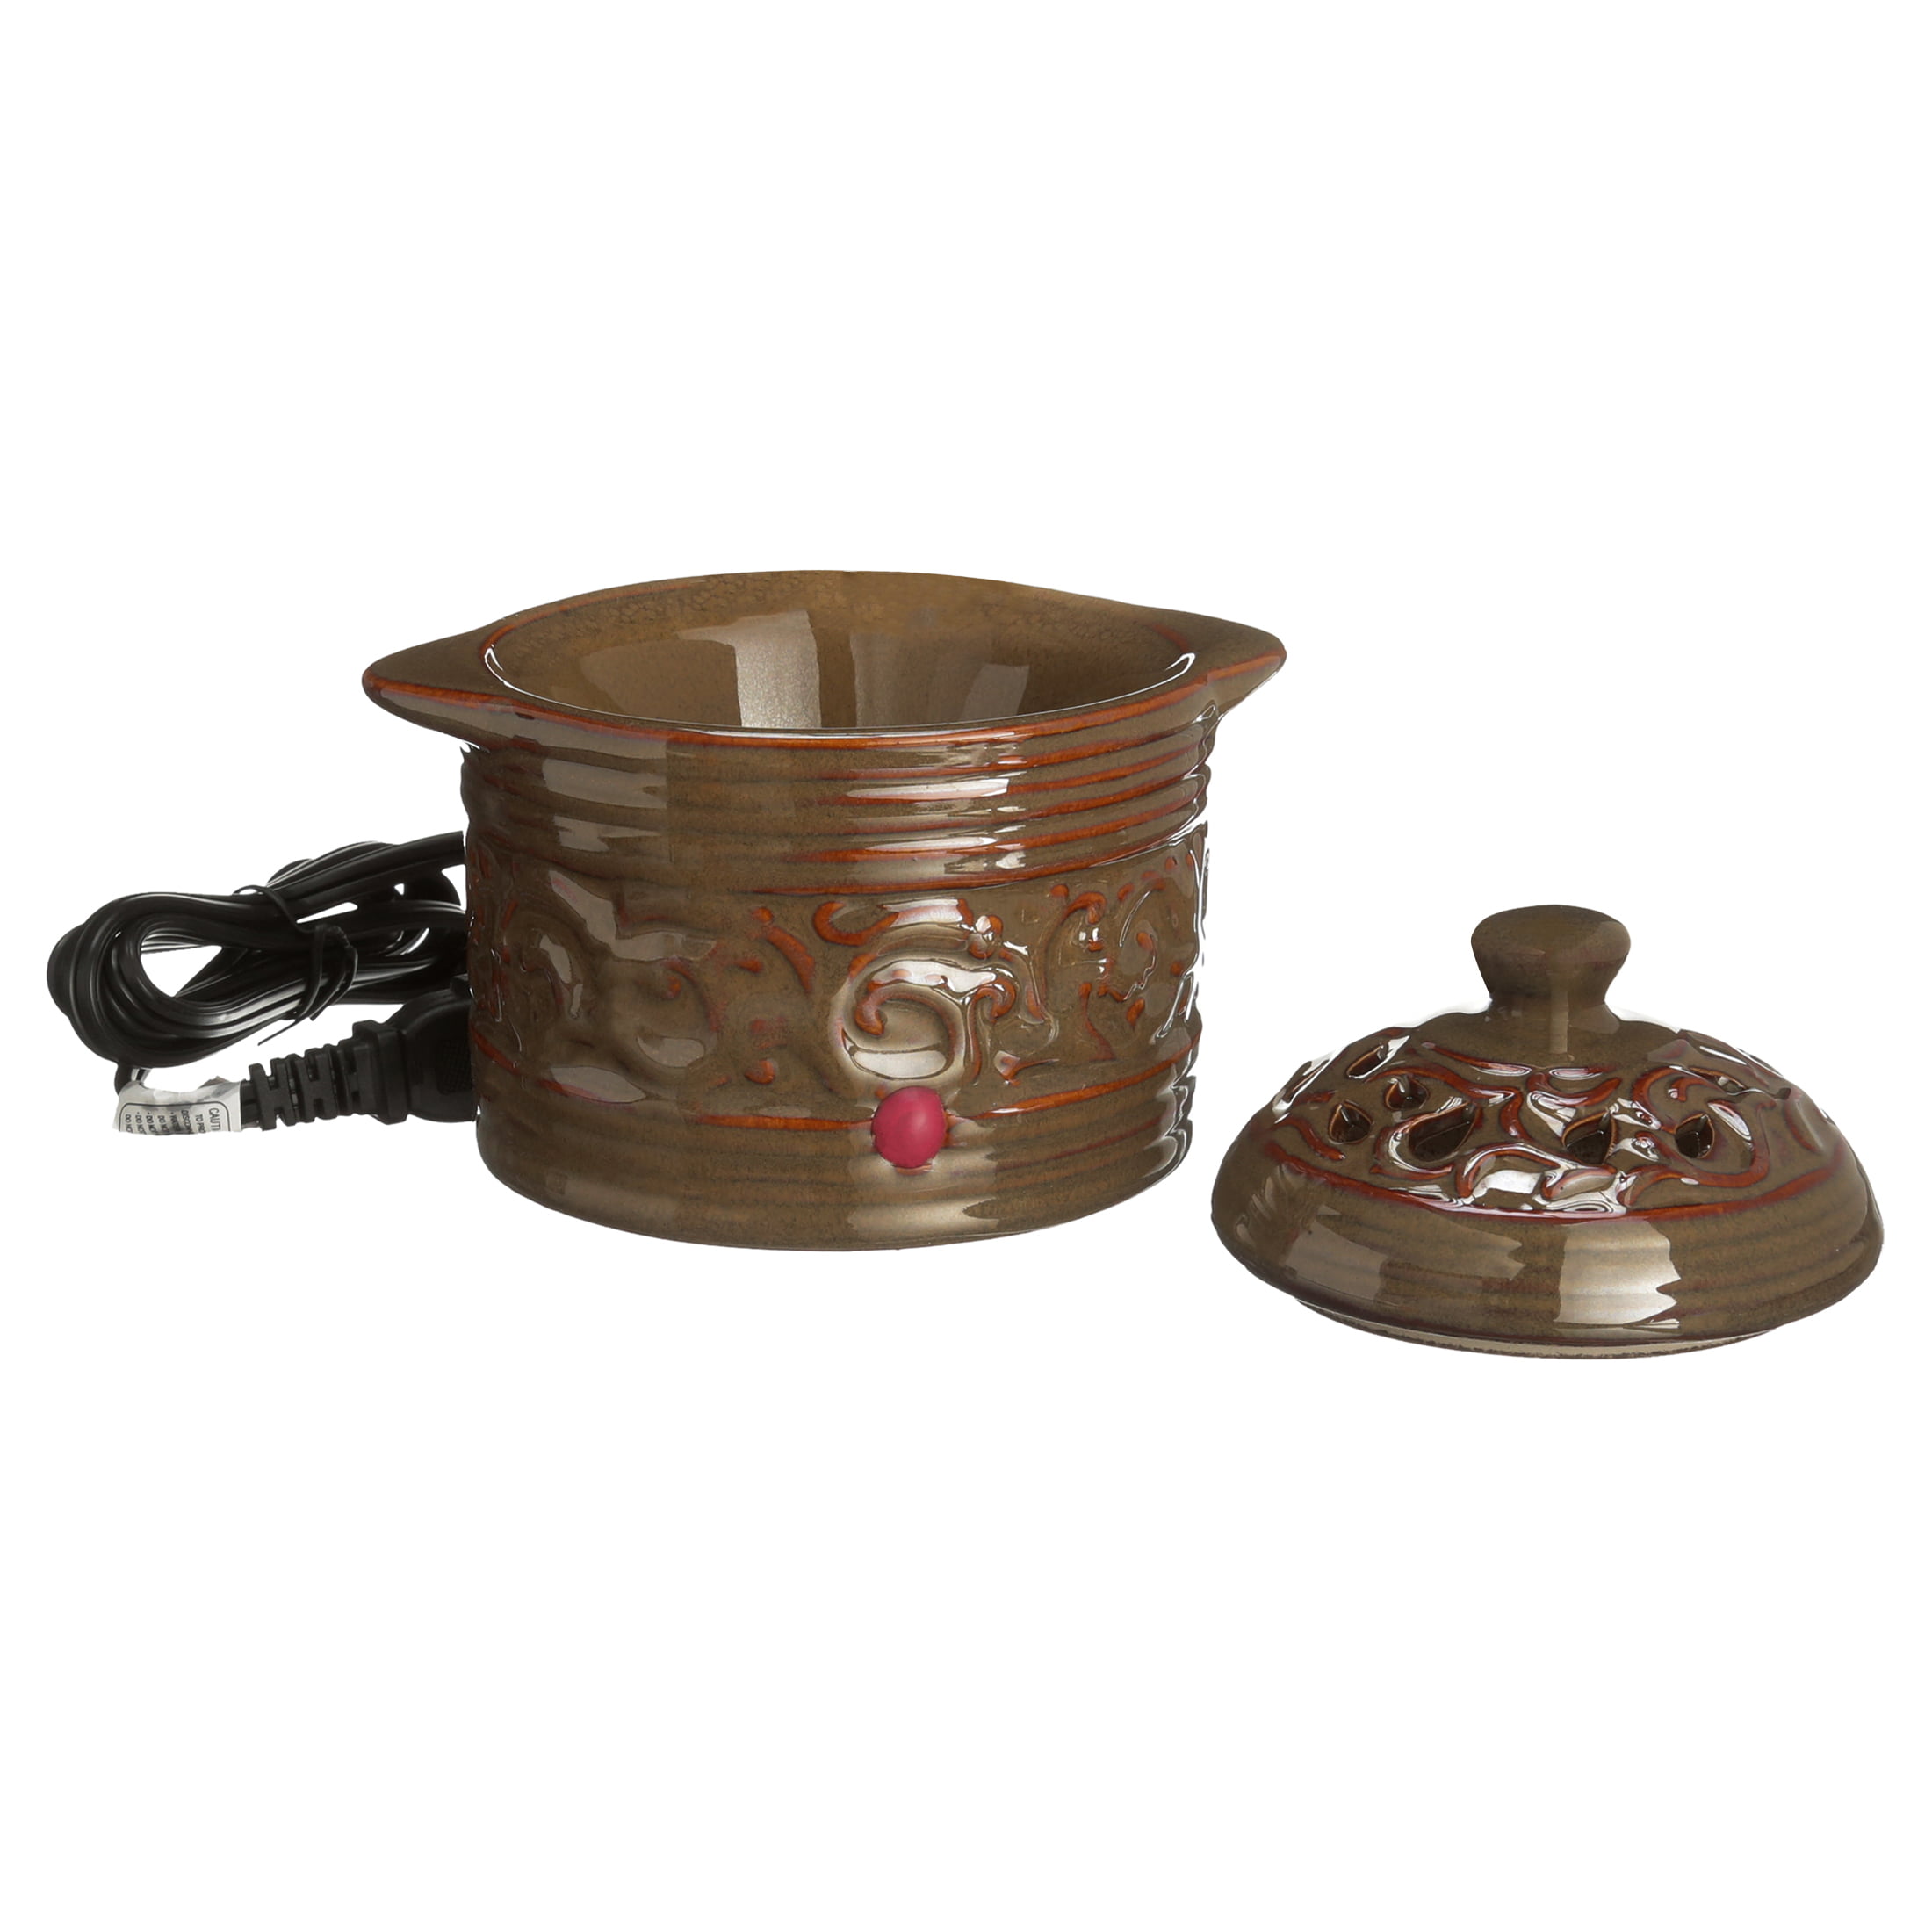 Find more Reduced--new Electric Liquid Potpourri Warmer for sale